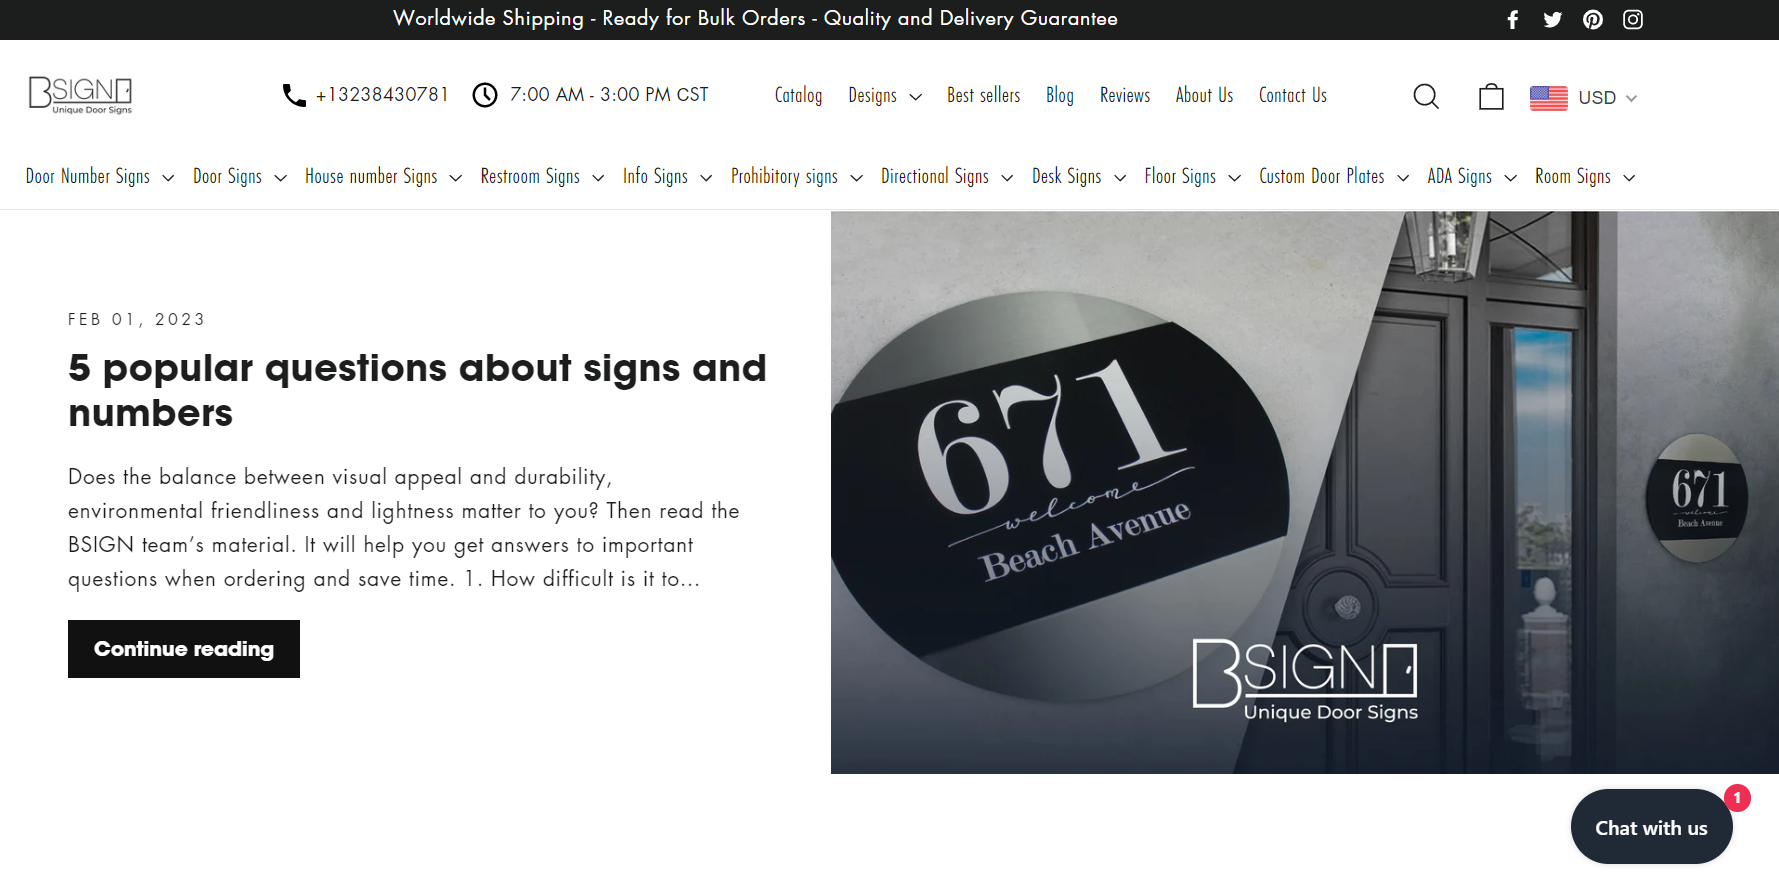 BSIGN: Ukrainian manufacturer of interior signs in the US, Canada, and Europe